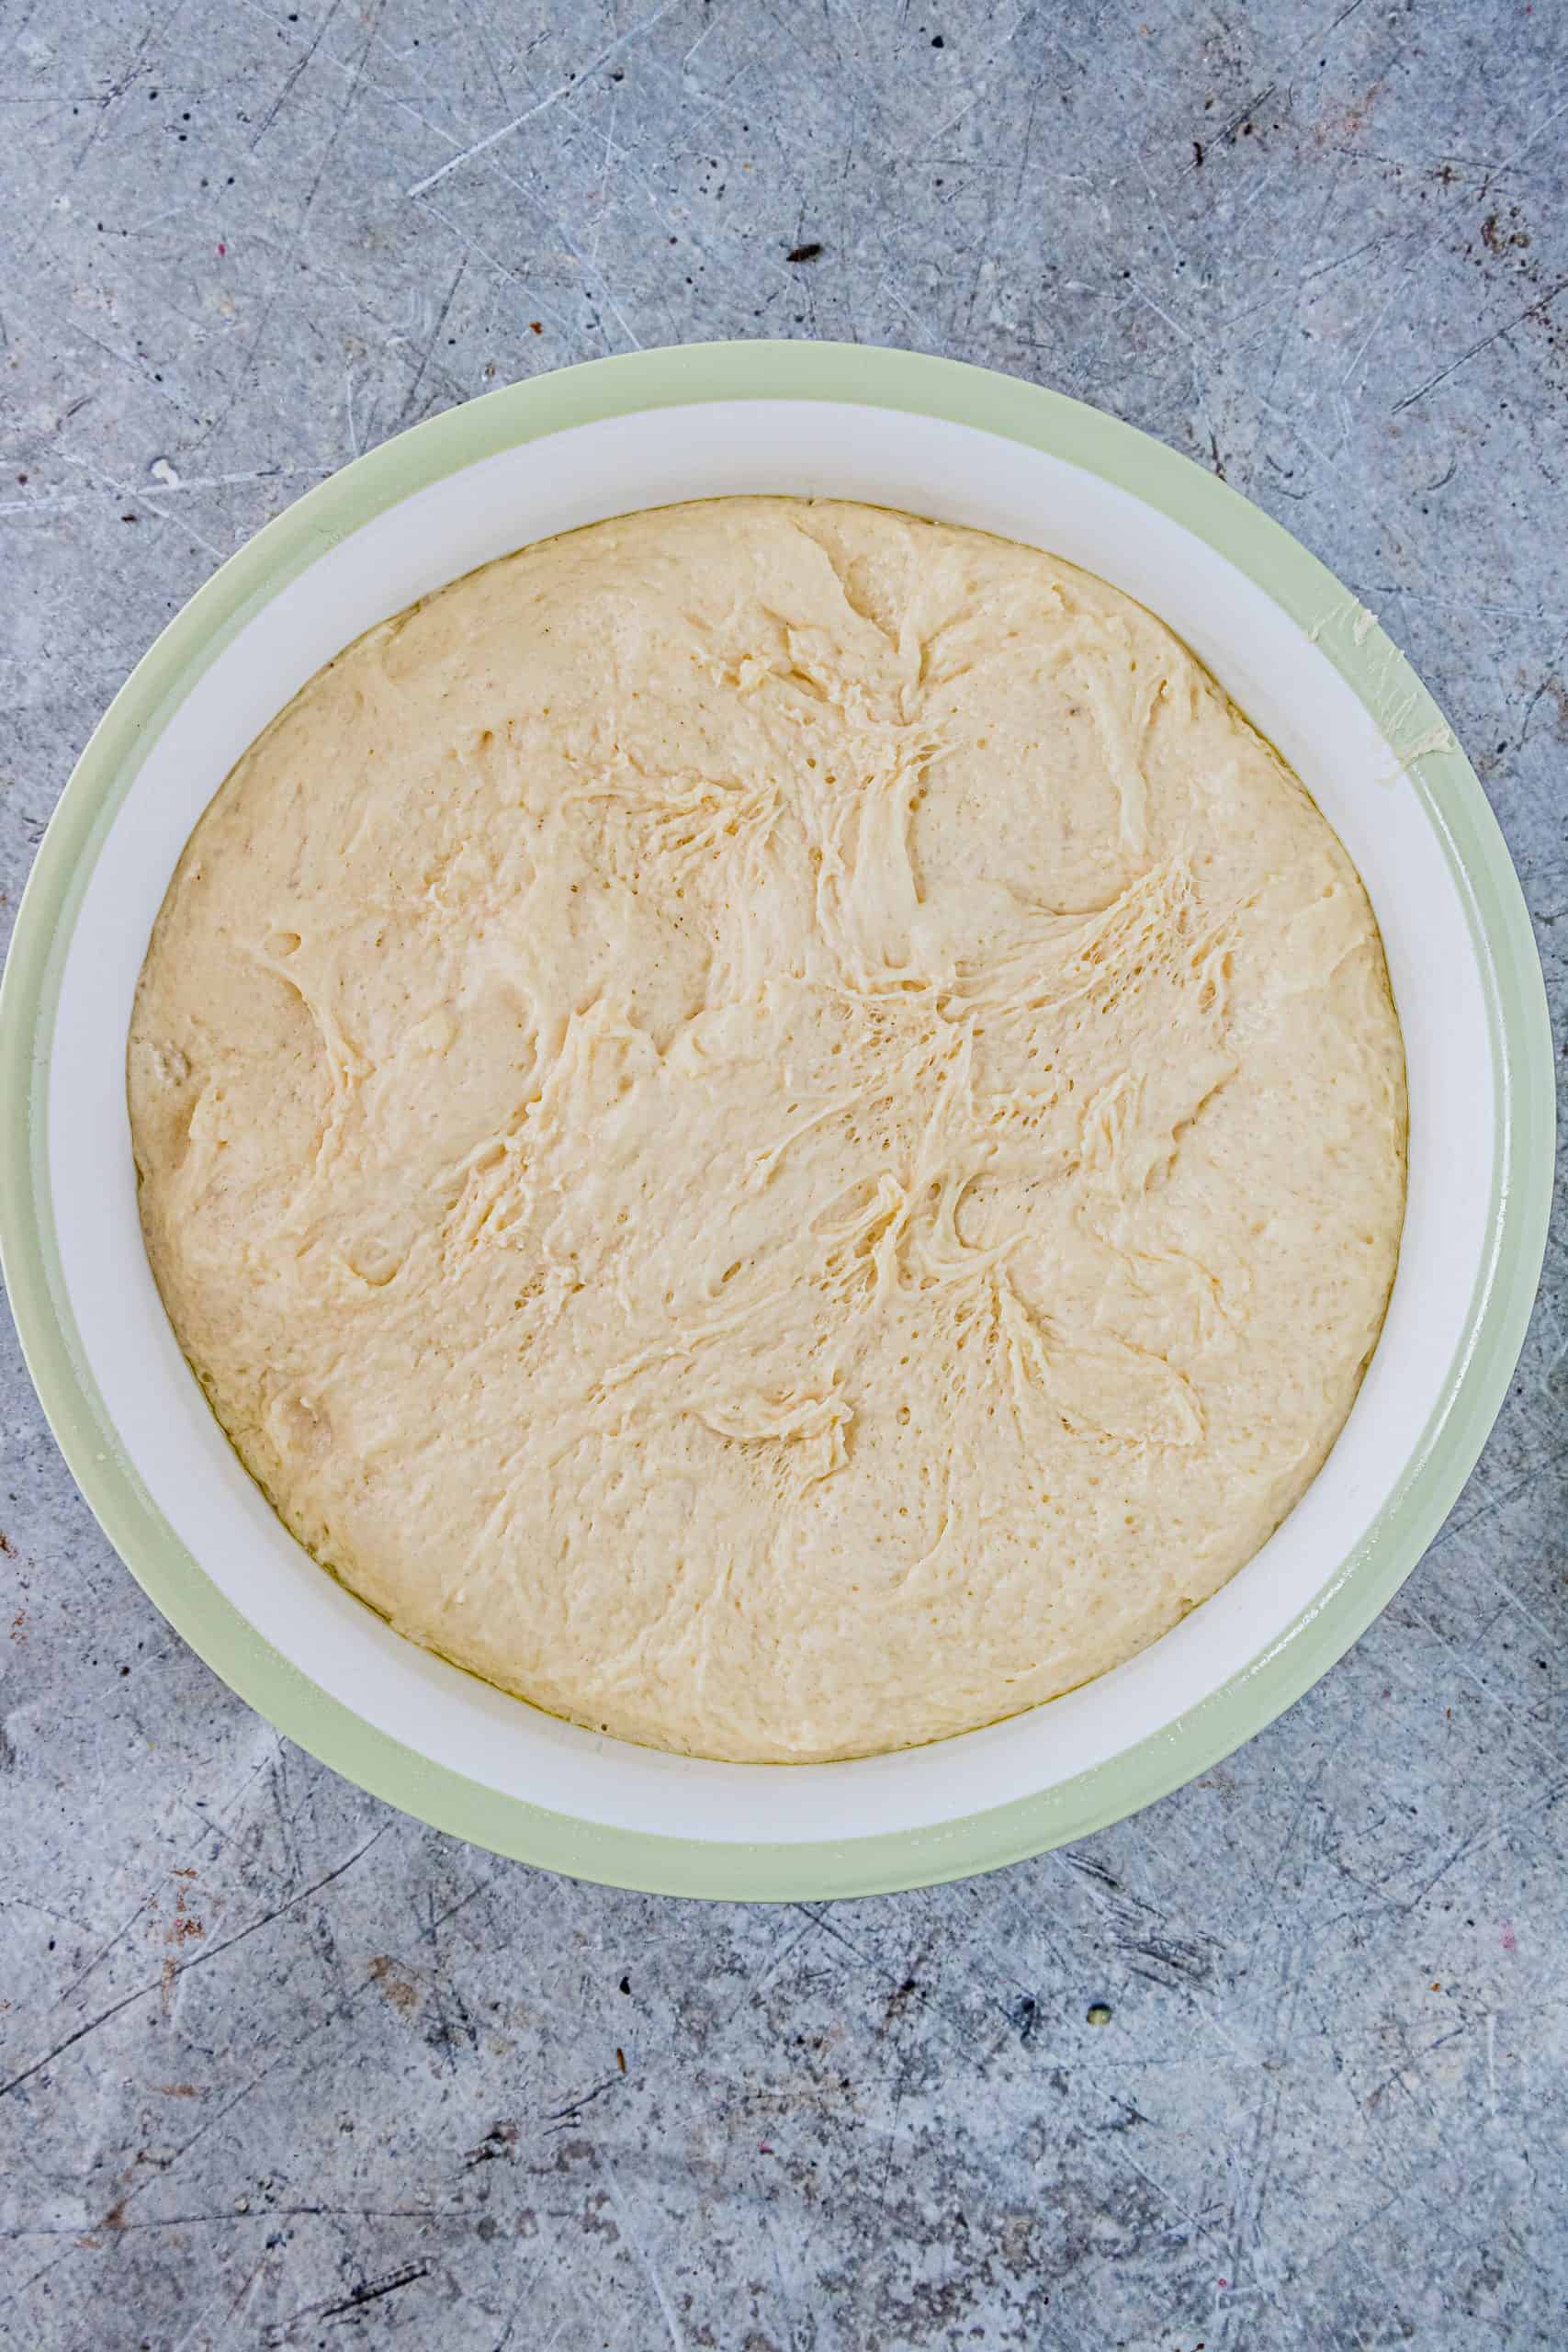 cinnamon roll yeast dough after it has increased in size in a large white bowl